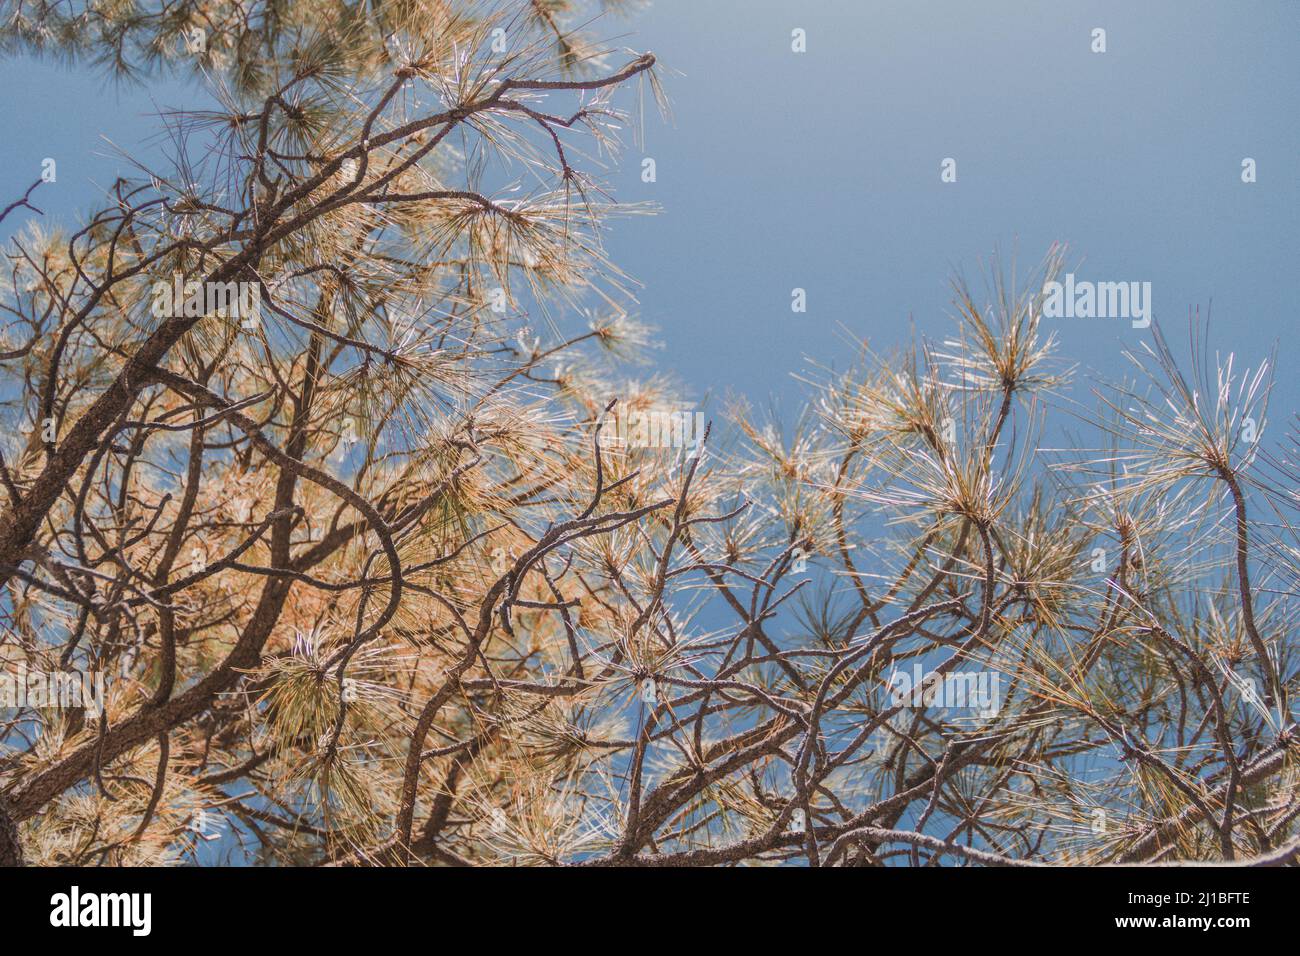 A closeup of the pine tree branches against the blue sky. Stock Photo